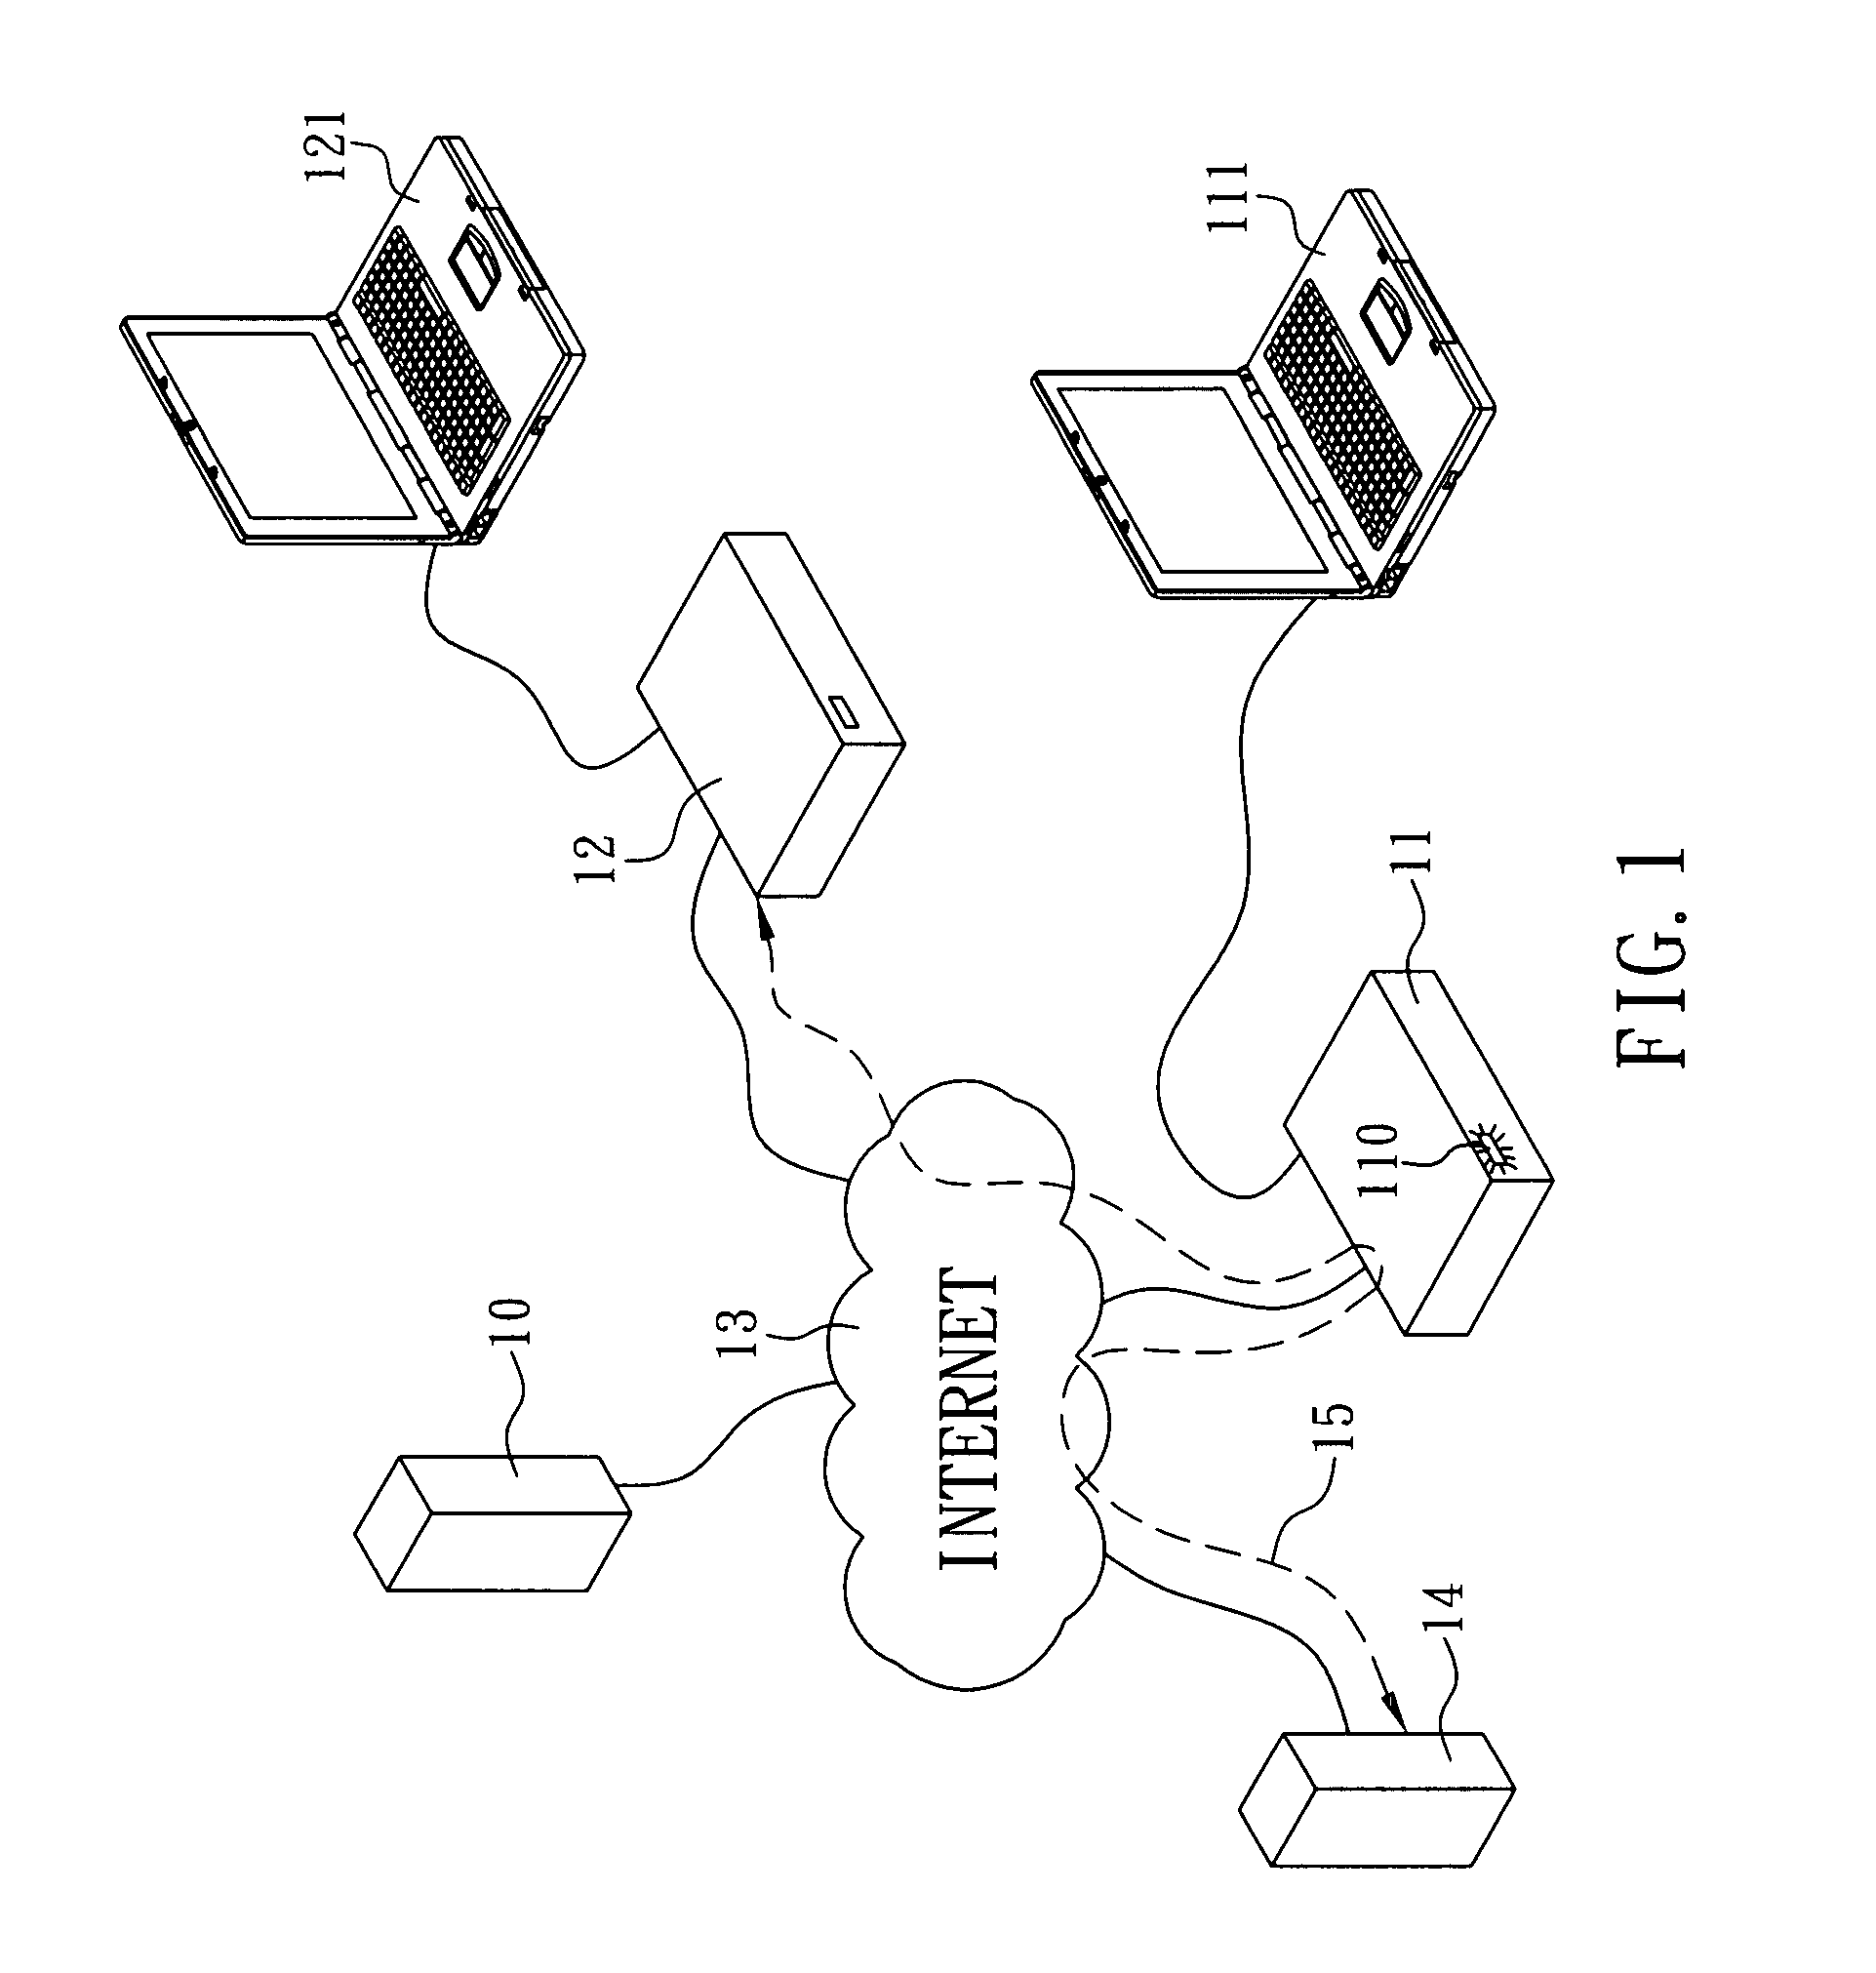 Method of making a router act as a relay proxy